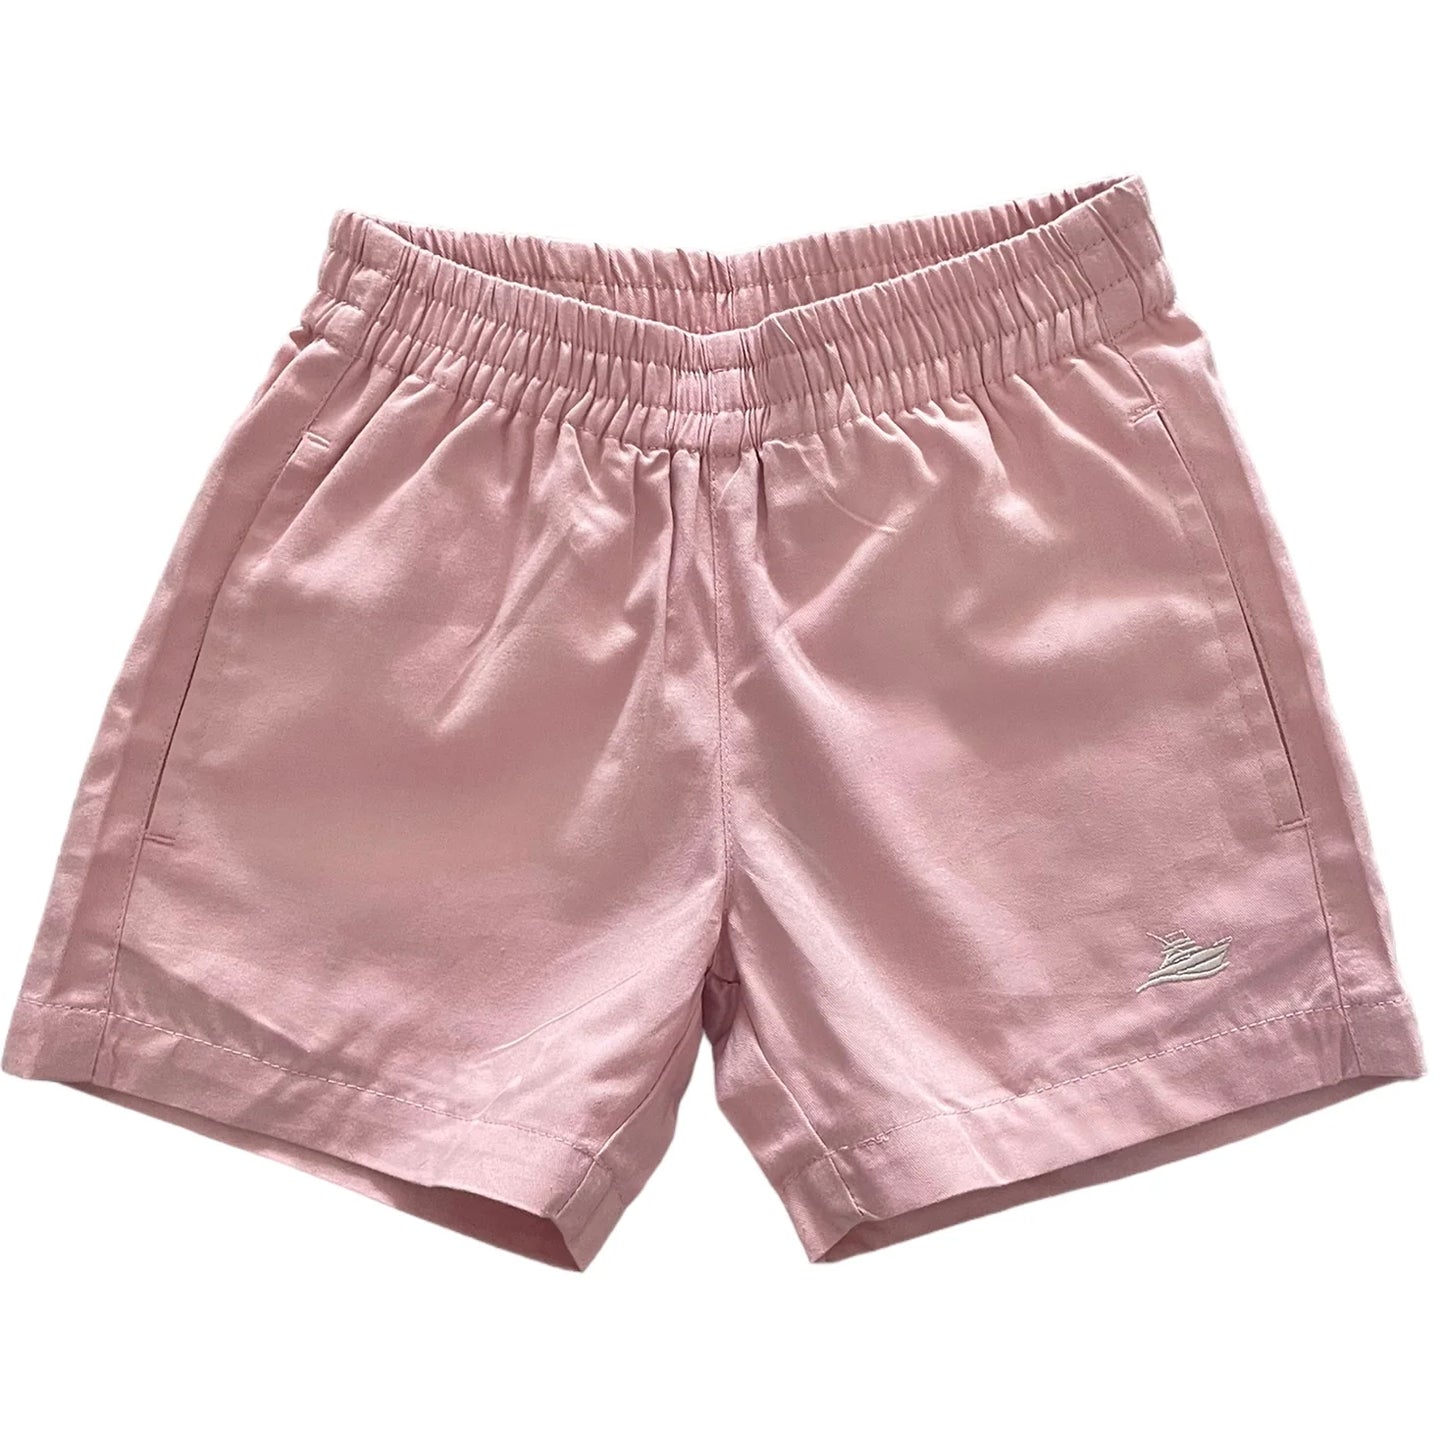 Dress Shorts in Peach 2T - Doodlebug's Children's Boutique